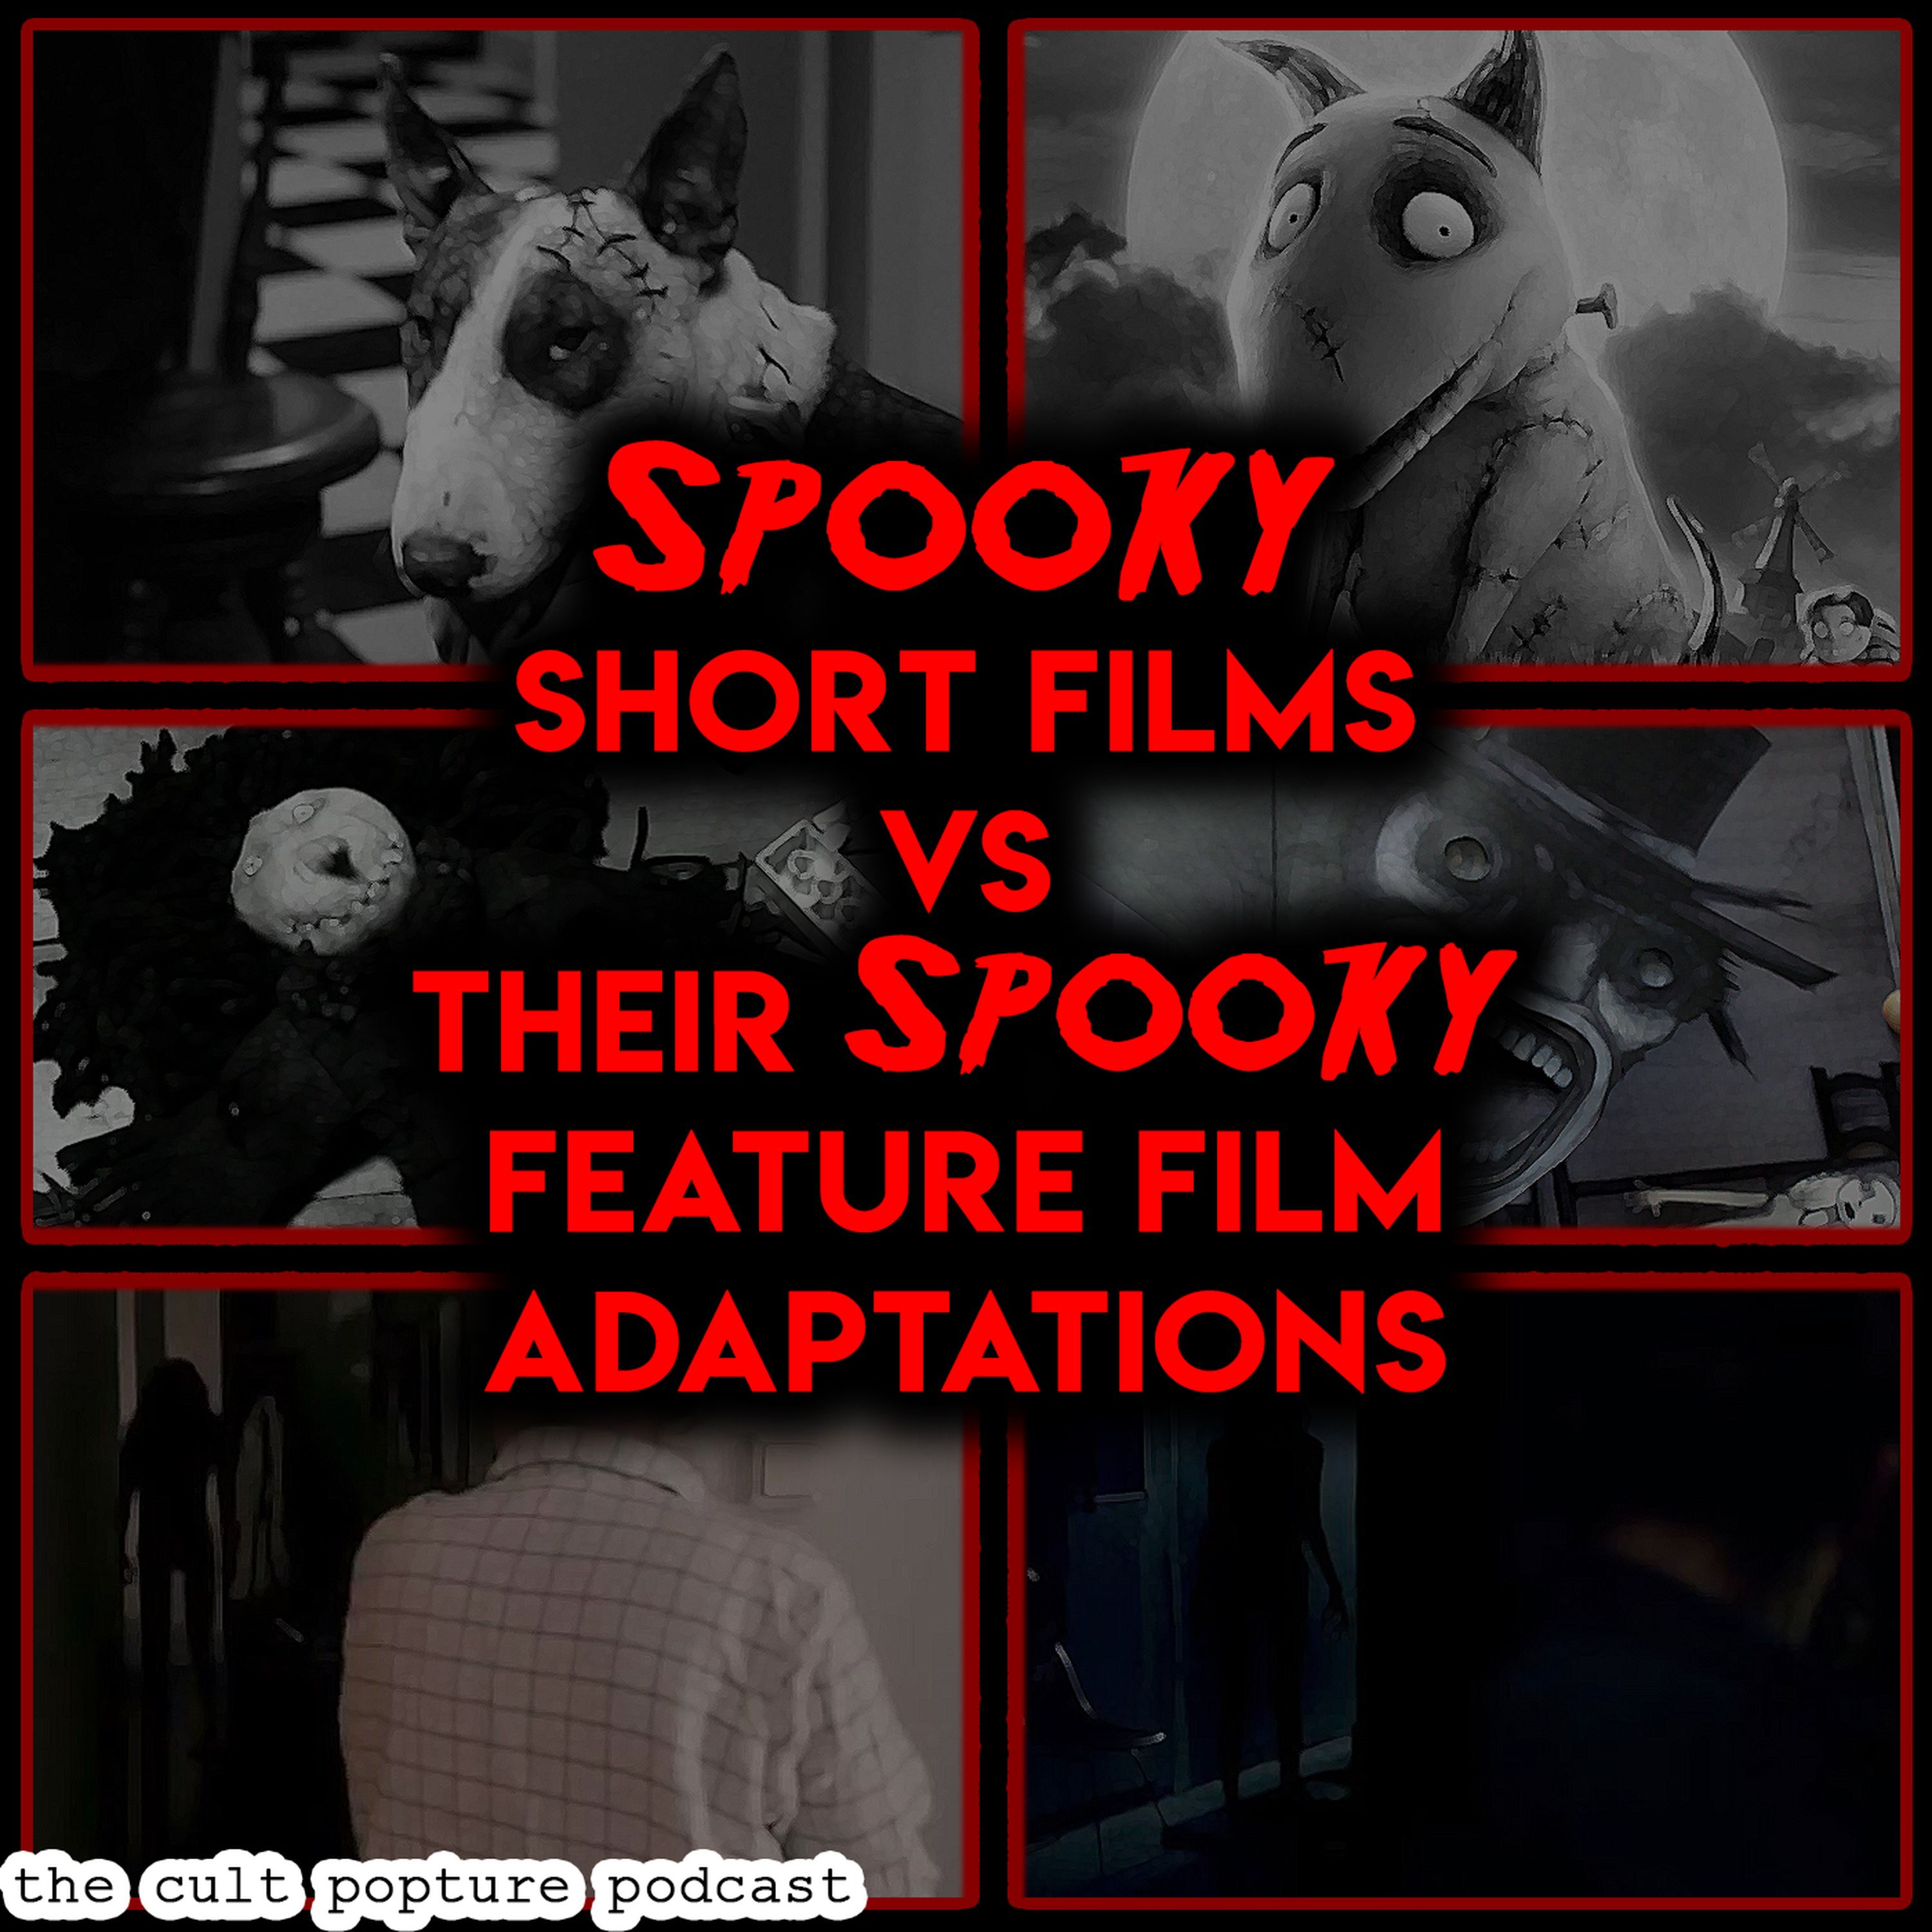 Spooky Short Films vs Their Spooky Feature Film Adaptations | The Cult Popture Podcast